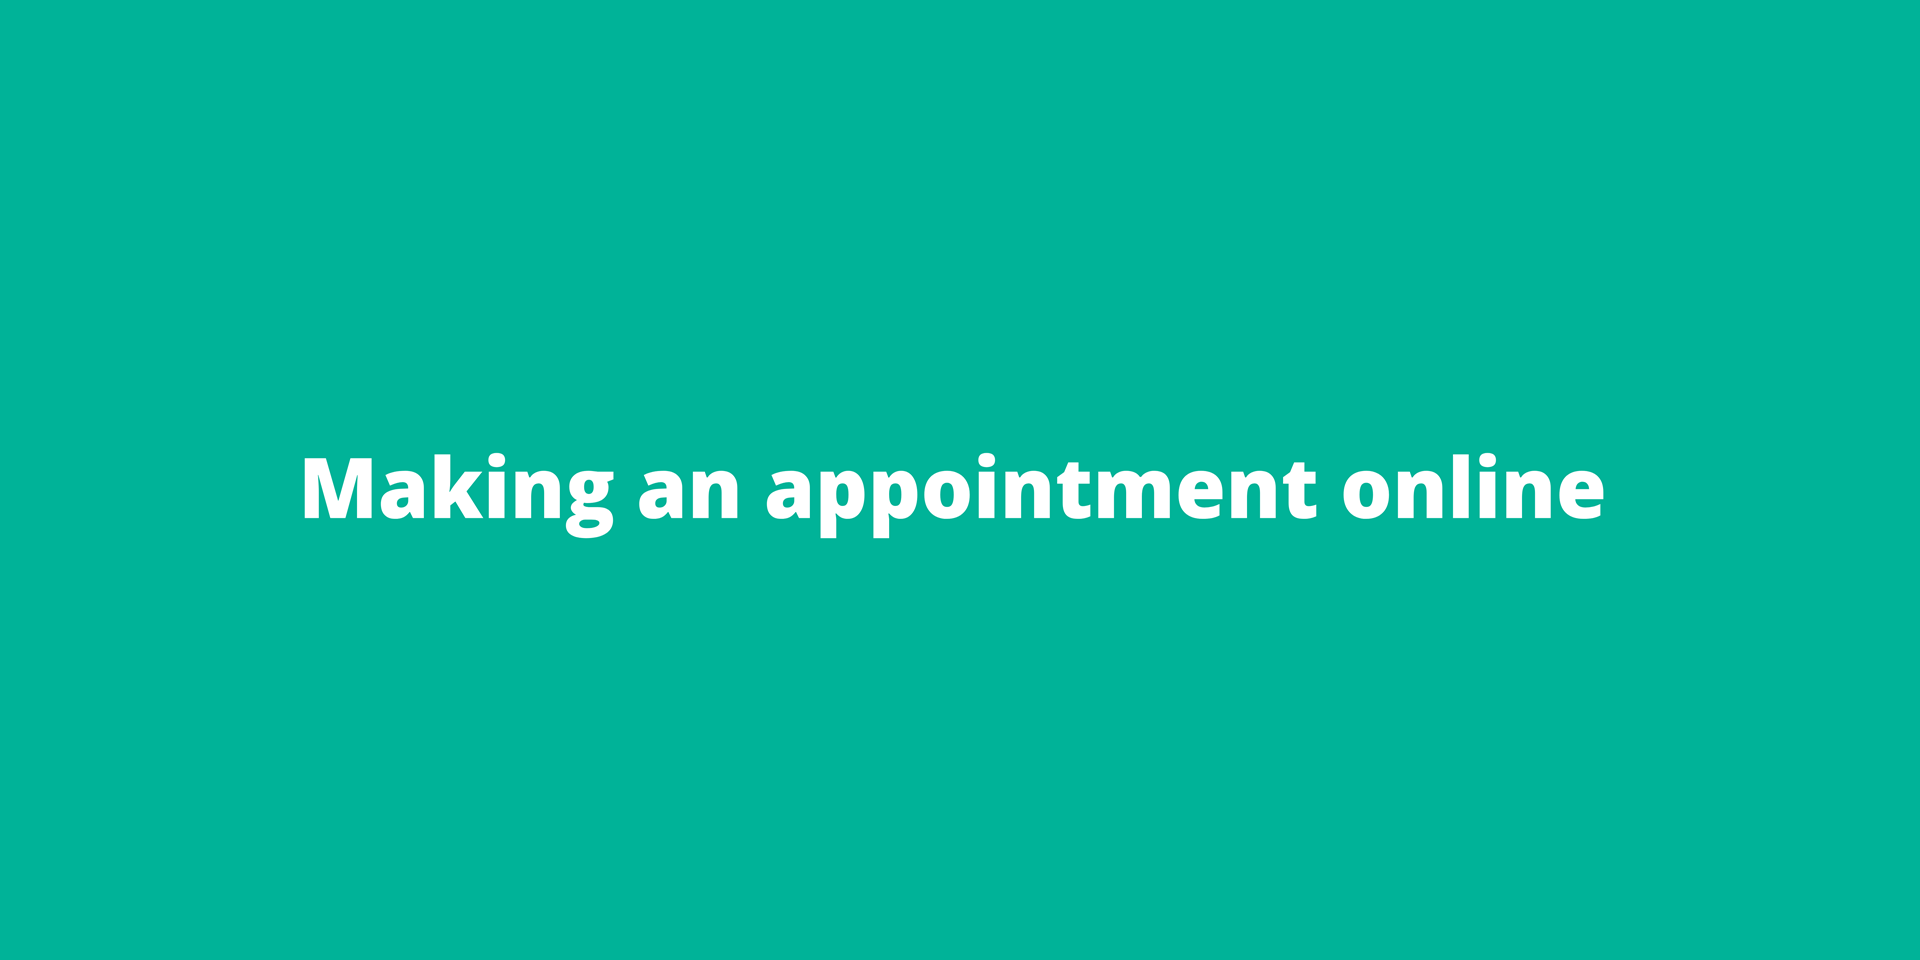 Making an online appointment